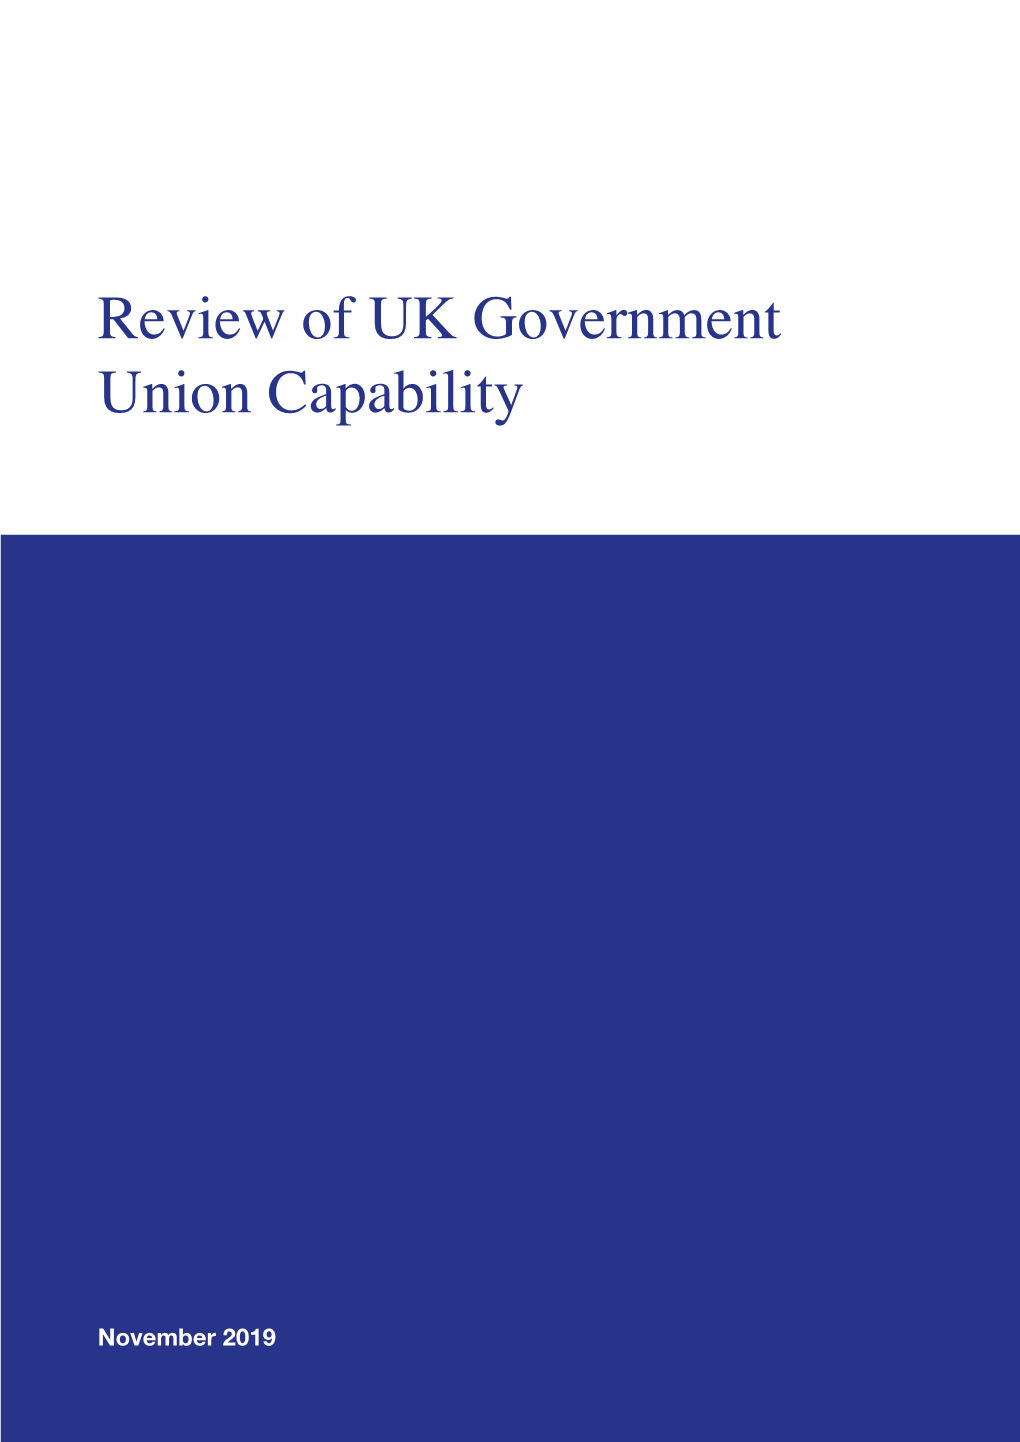 The Dunlop Review of UK Government Union Capability